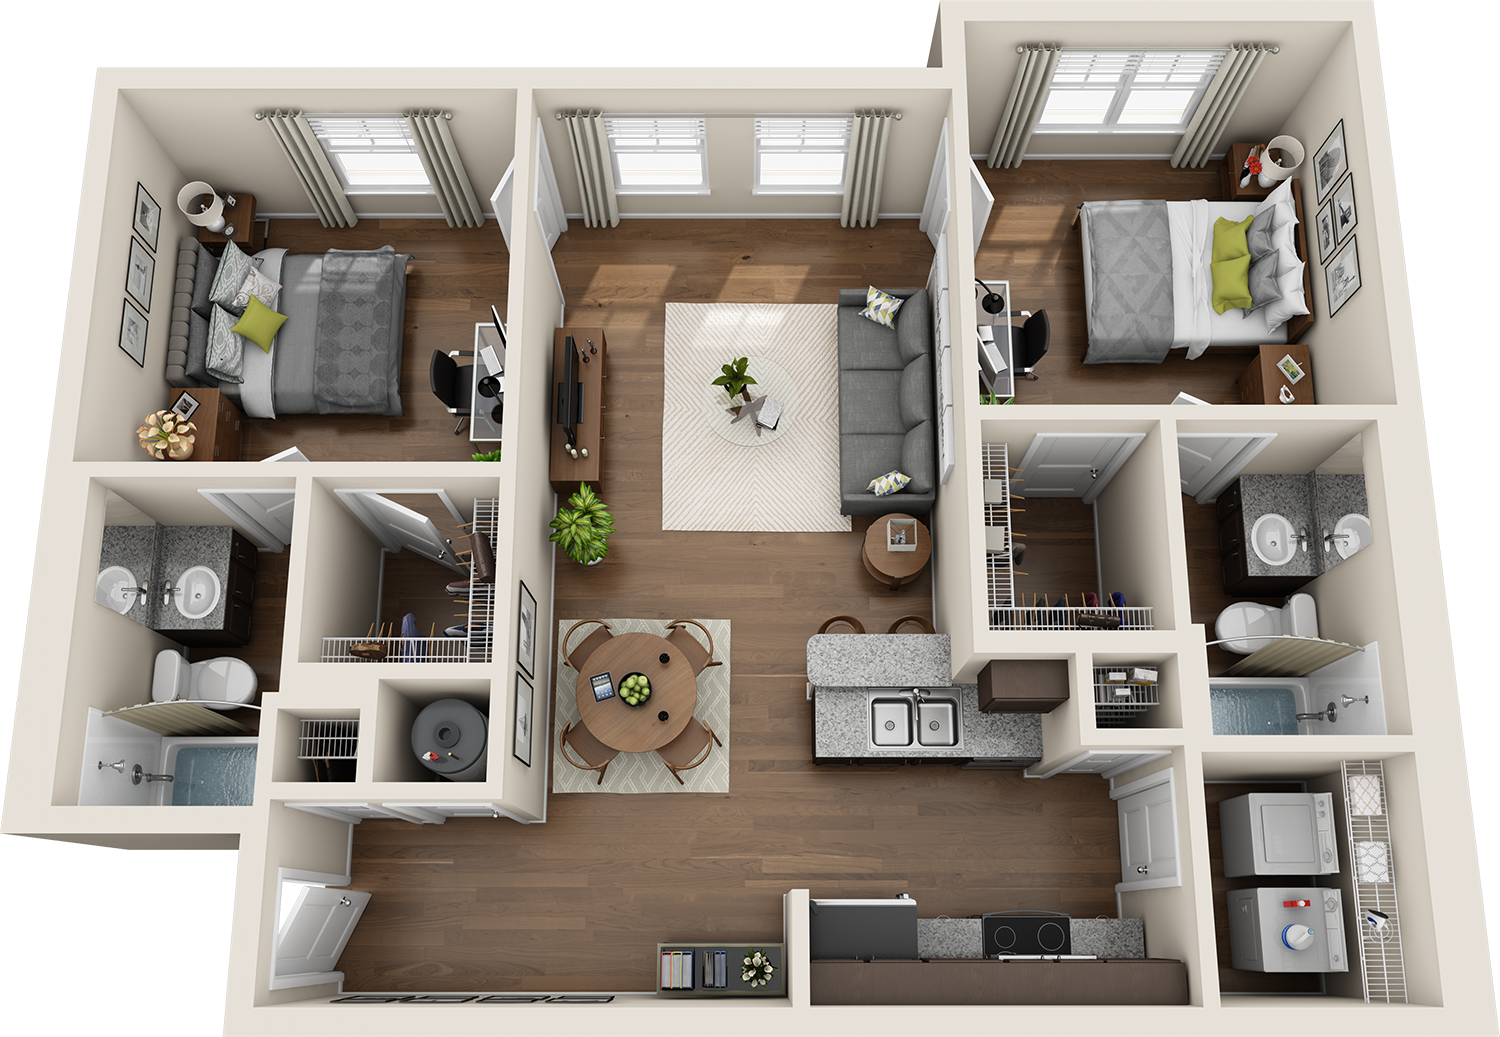 b1 example floor plan at forum at tallahassee student apartments